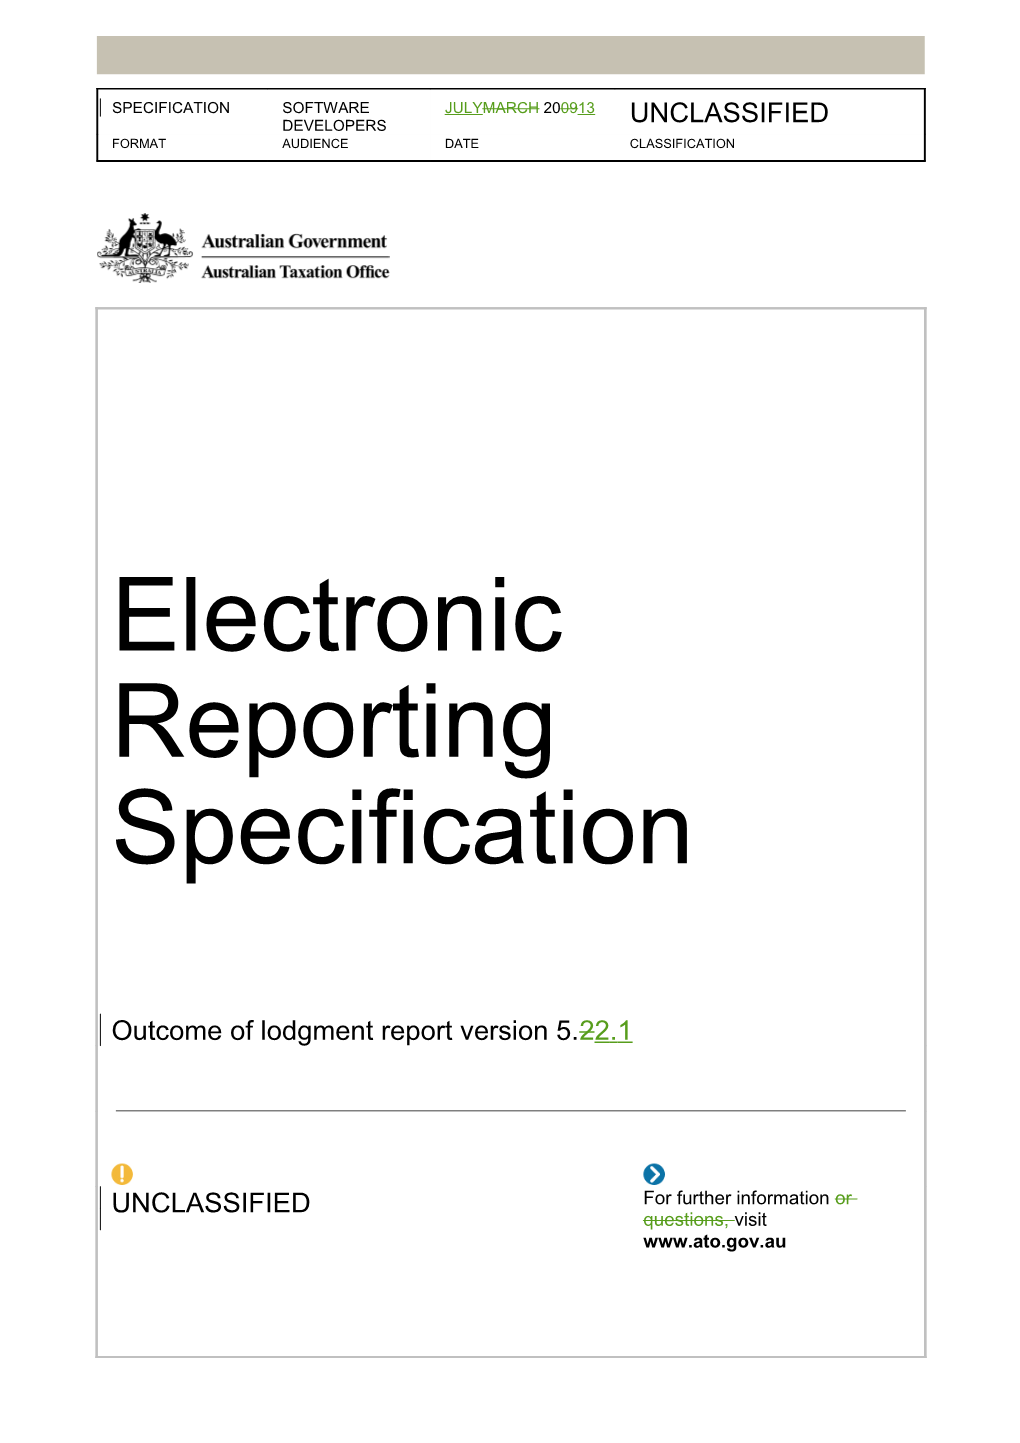 Electronic Reporting Specification - Outcome of Lodgment